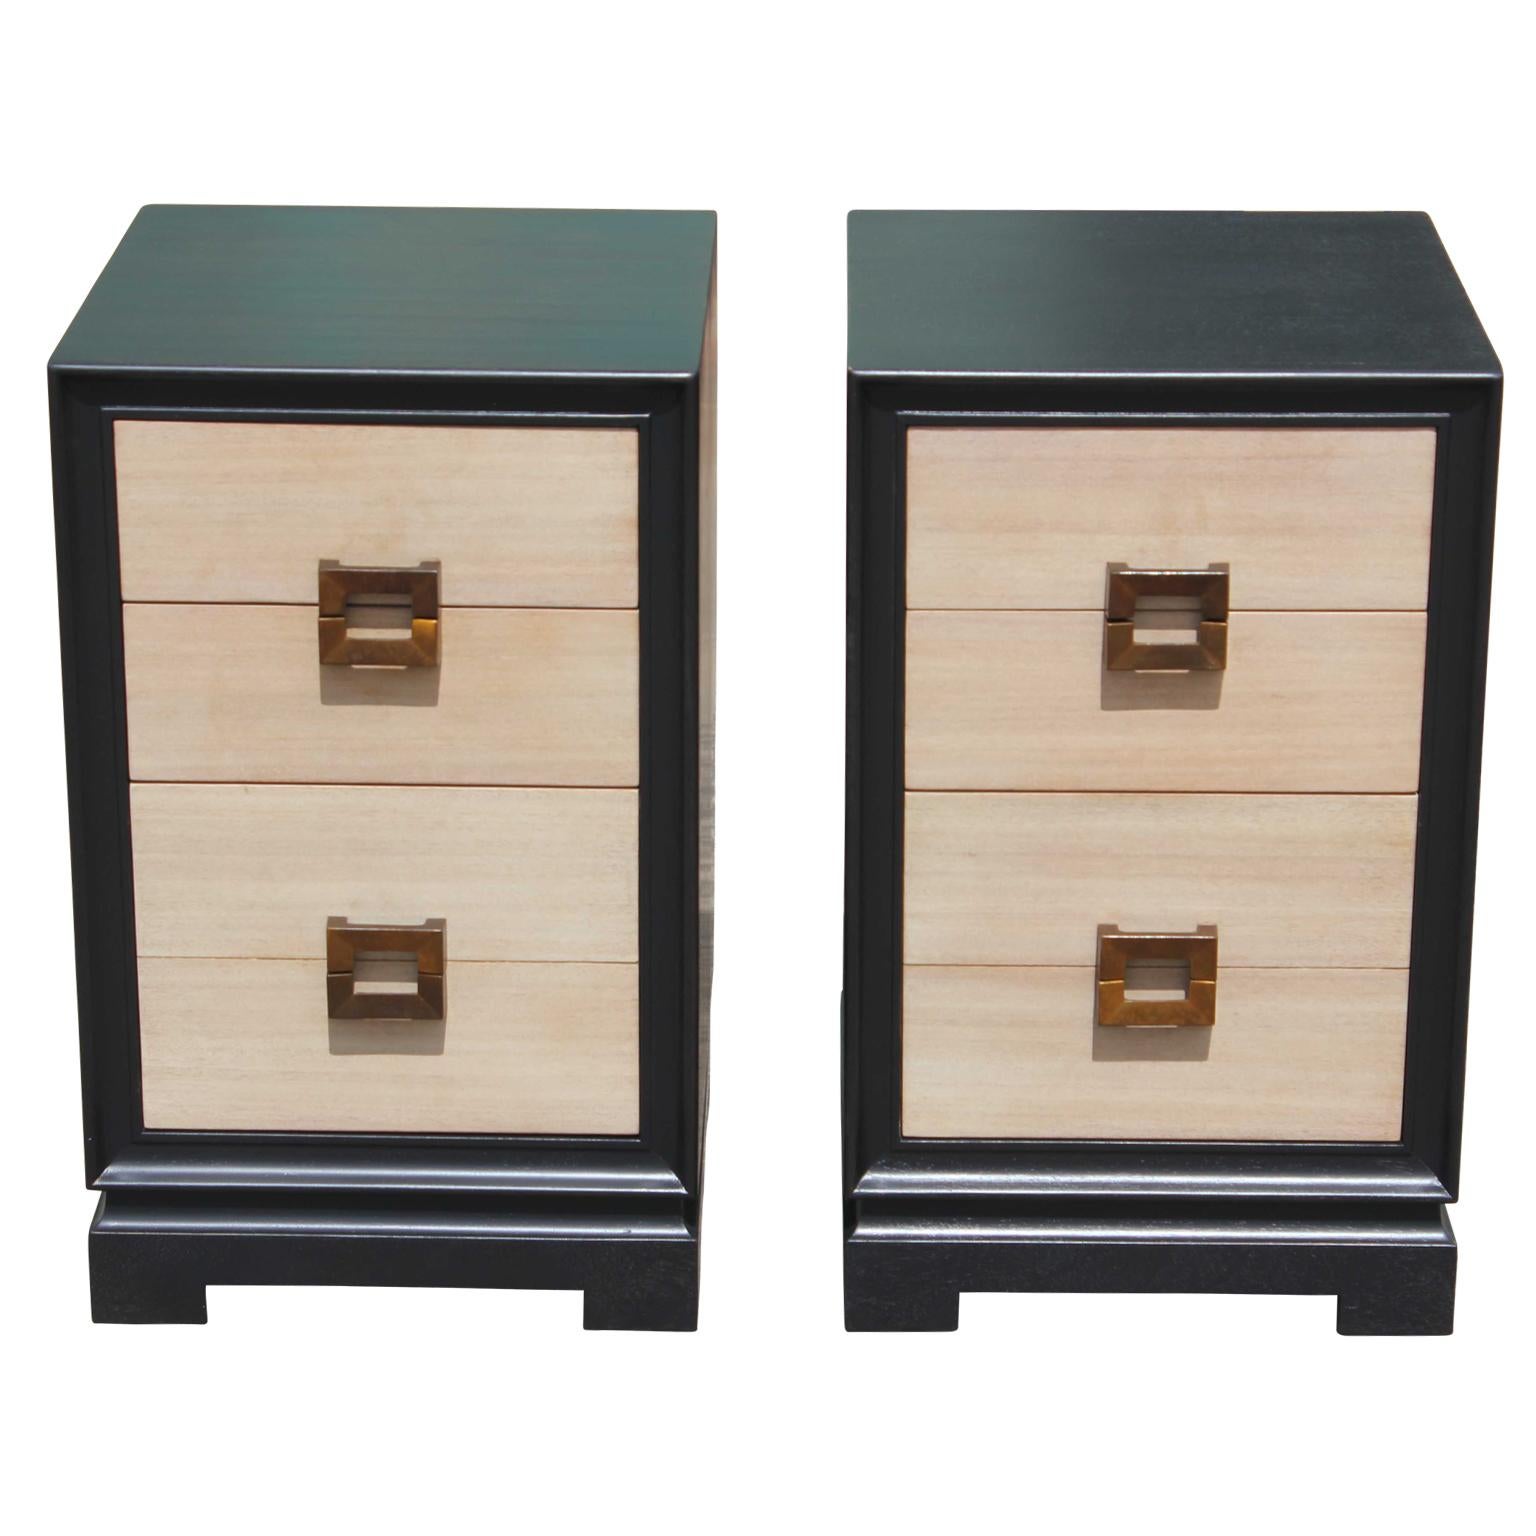 Modern pair of two-tone four-drawer nightstands with a neutral finish on the front of the drawers and with brass pulls. In the style of Grosfeld House or Baker Furniture.